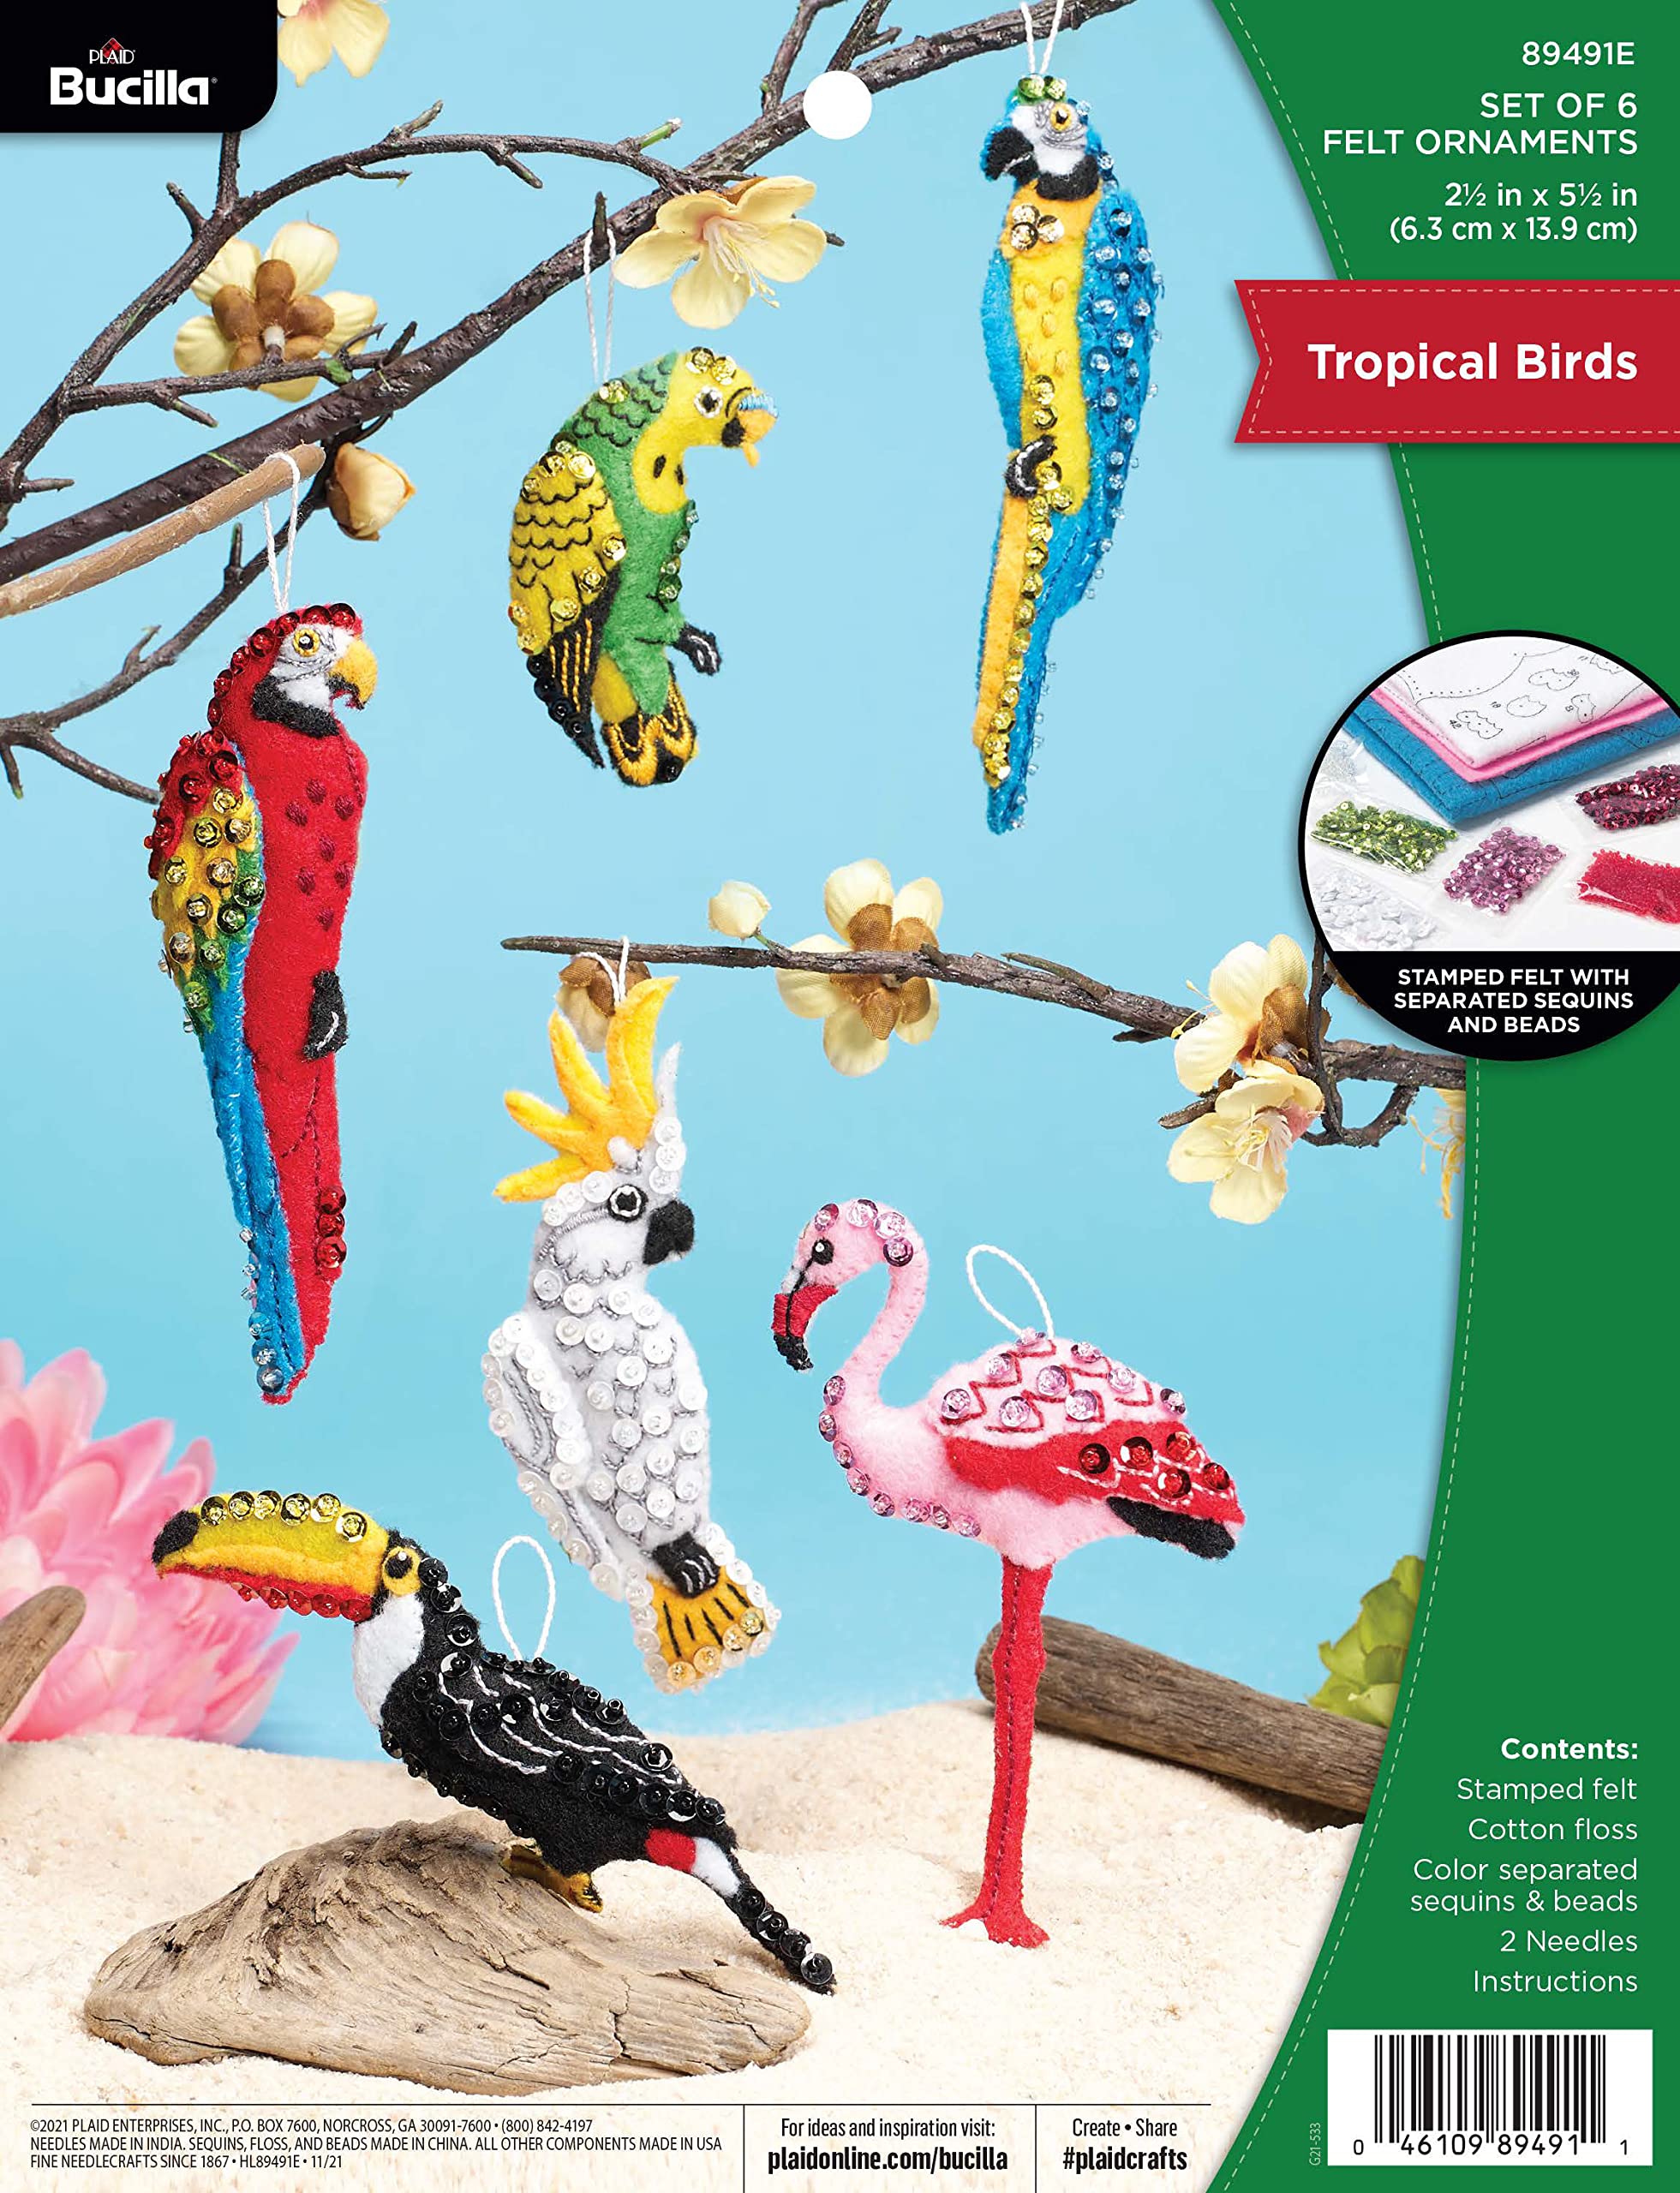 Bucilla, Tropical Birds Set of 6 Felt Applique Ornament Making Kit, Perfect for DIY Needlepoint Arts and Crafts, 89491E